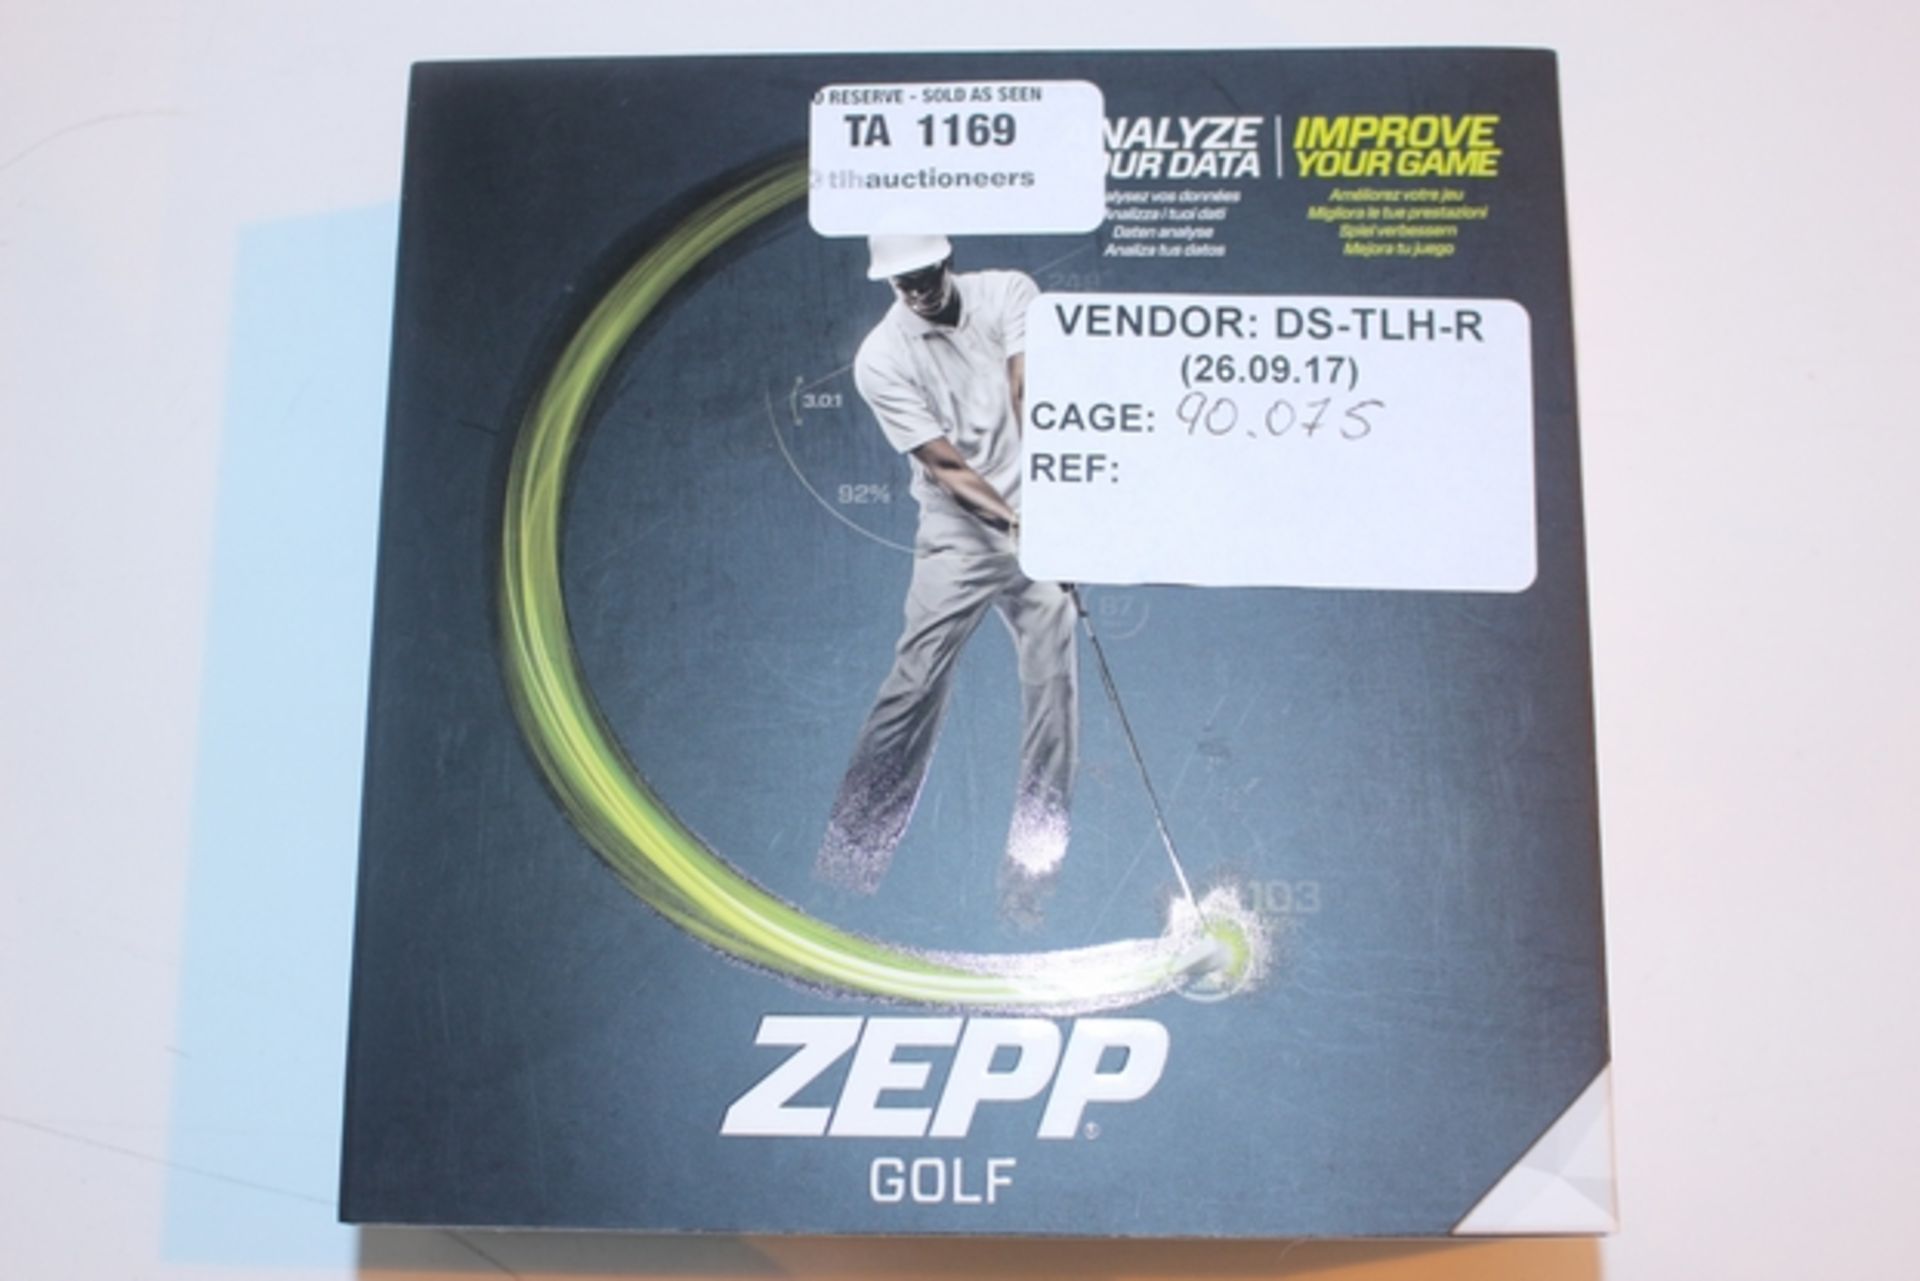 1X BOXED ZEPP GOLF (DS-TLH-R) (90.075)